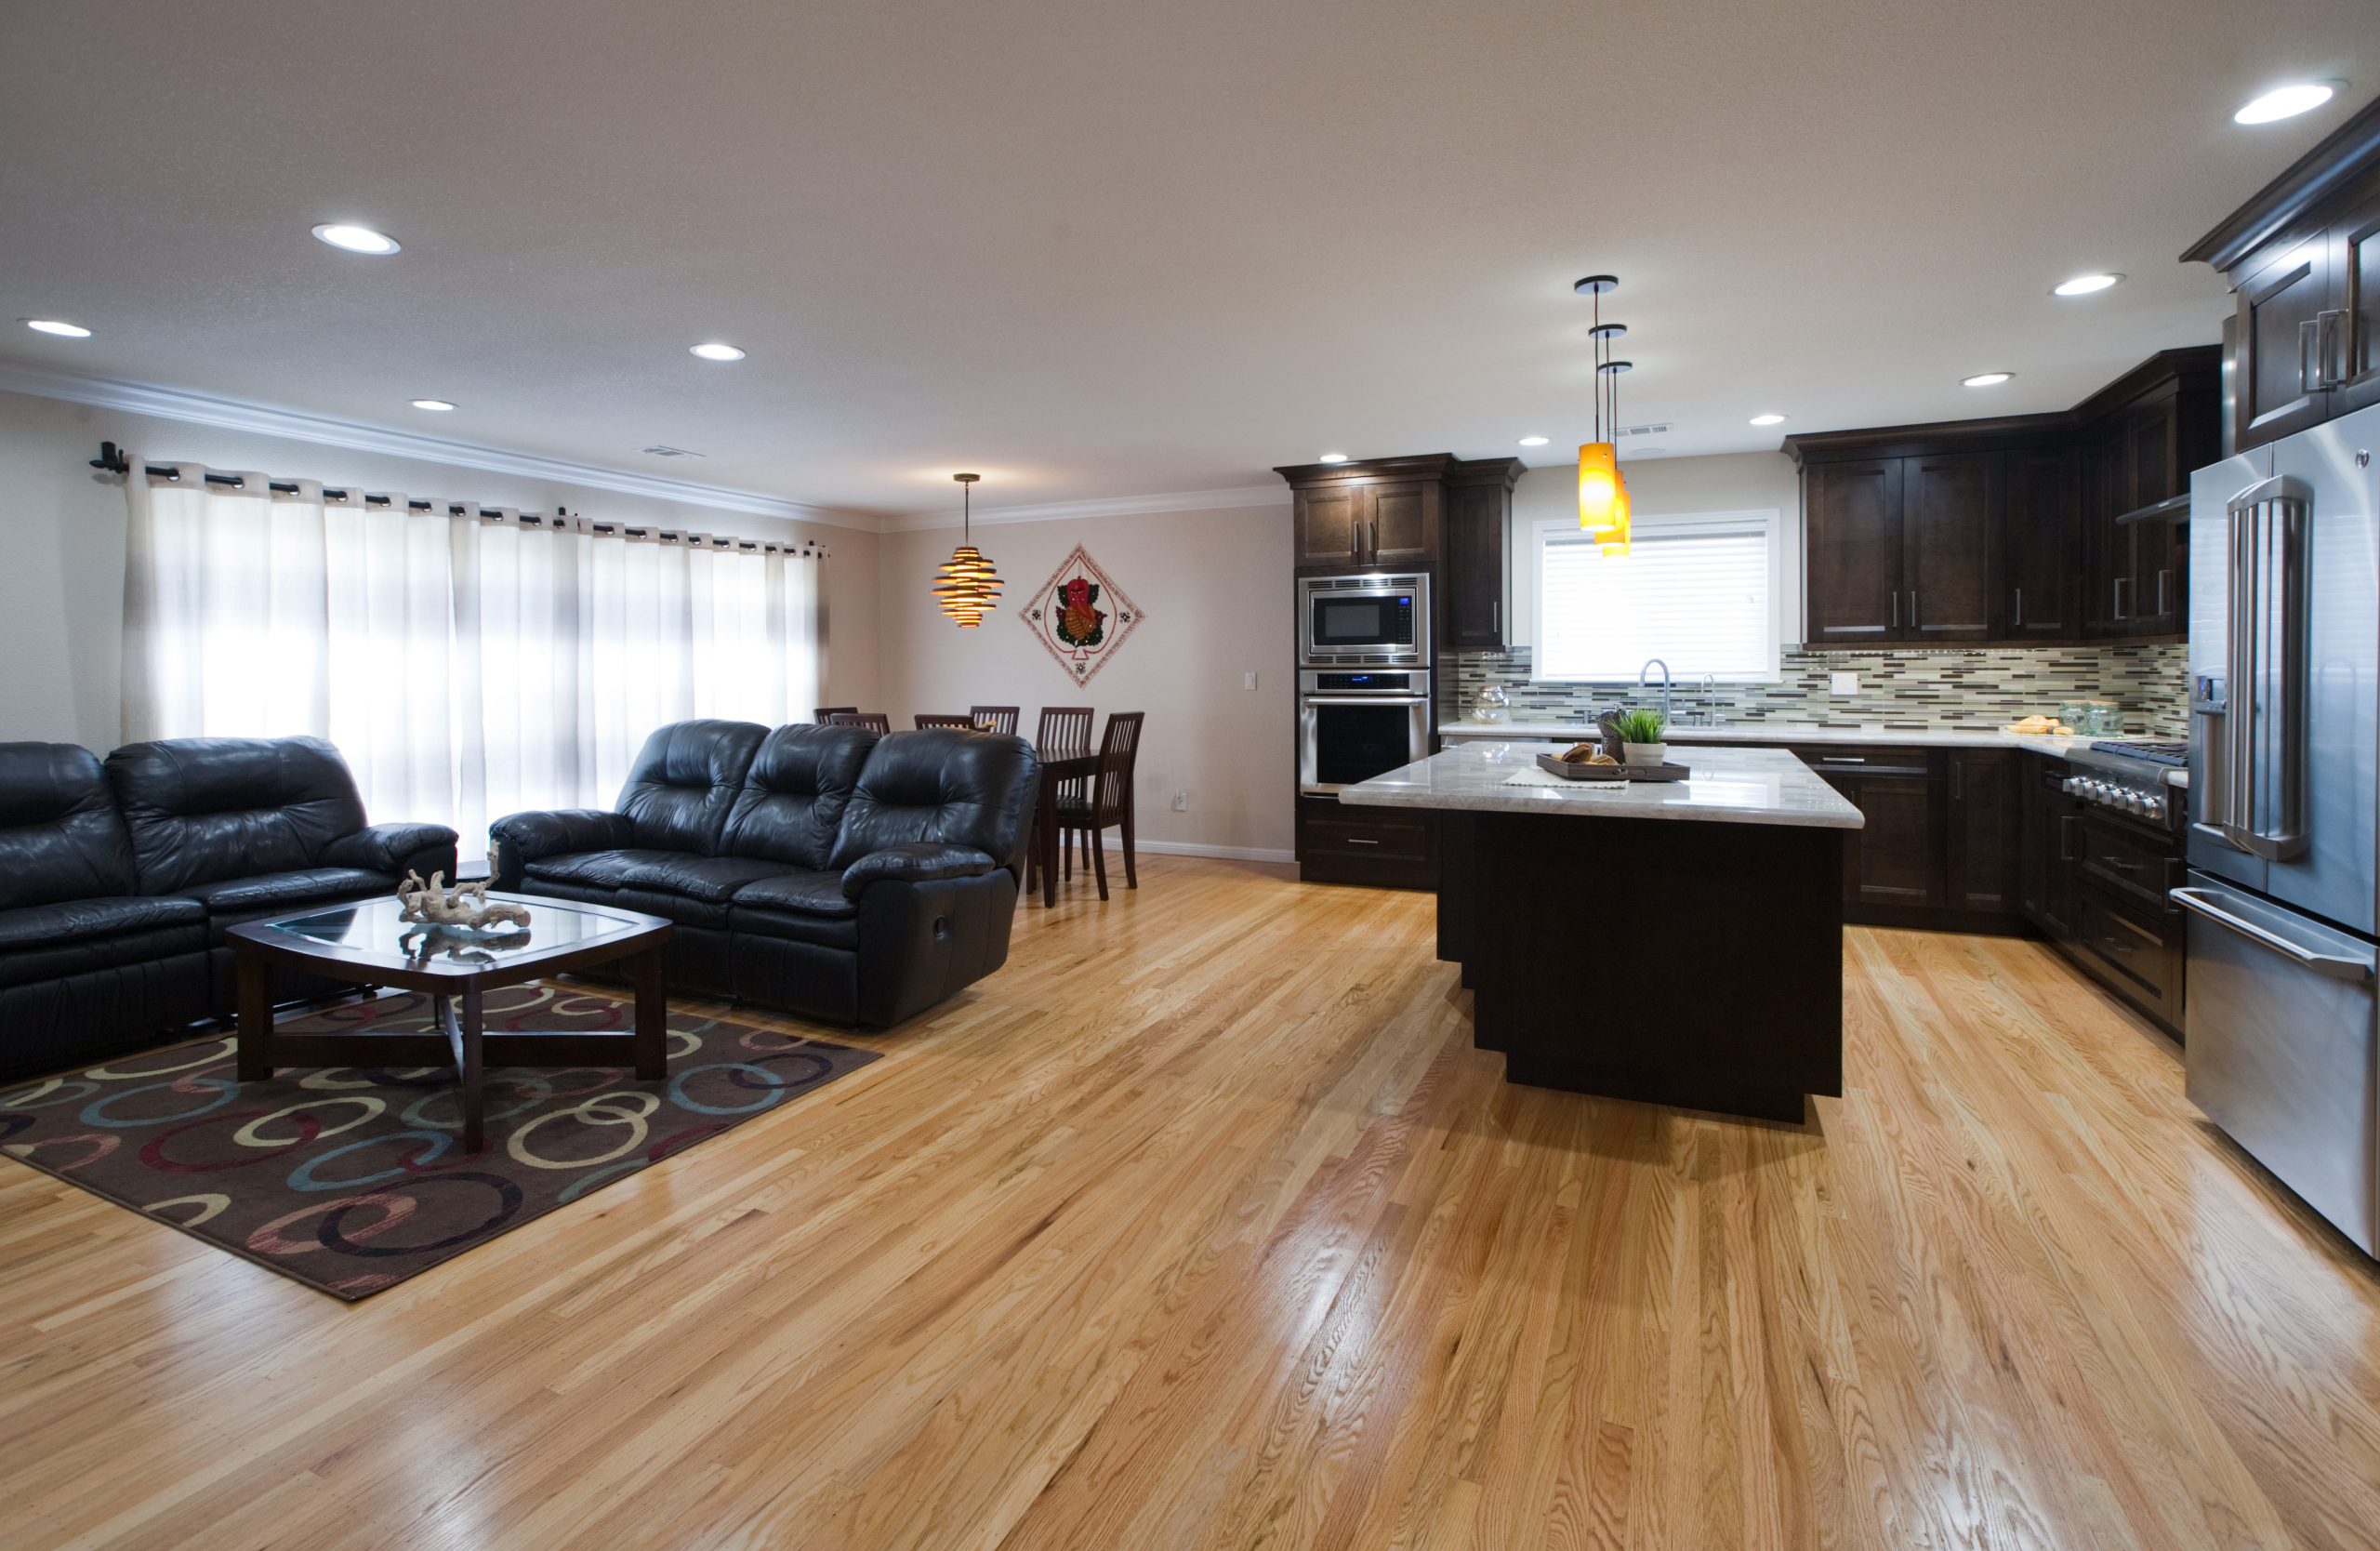 A living room and kitchen remodel with hardwood floors and granite counter tops.